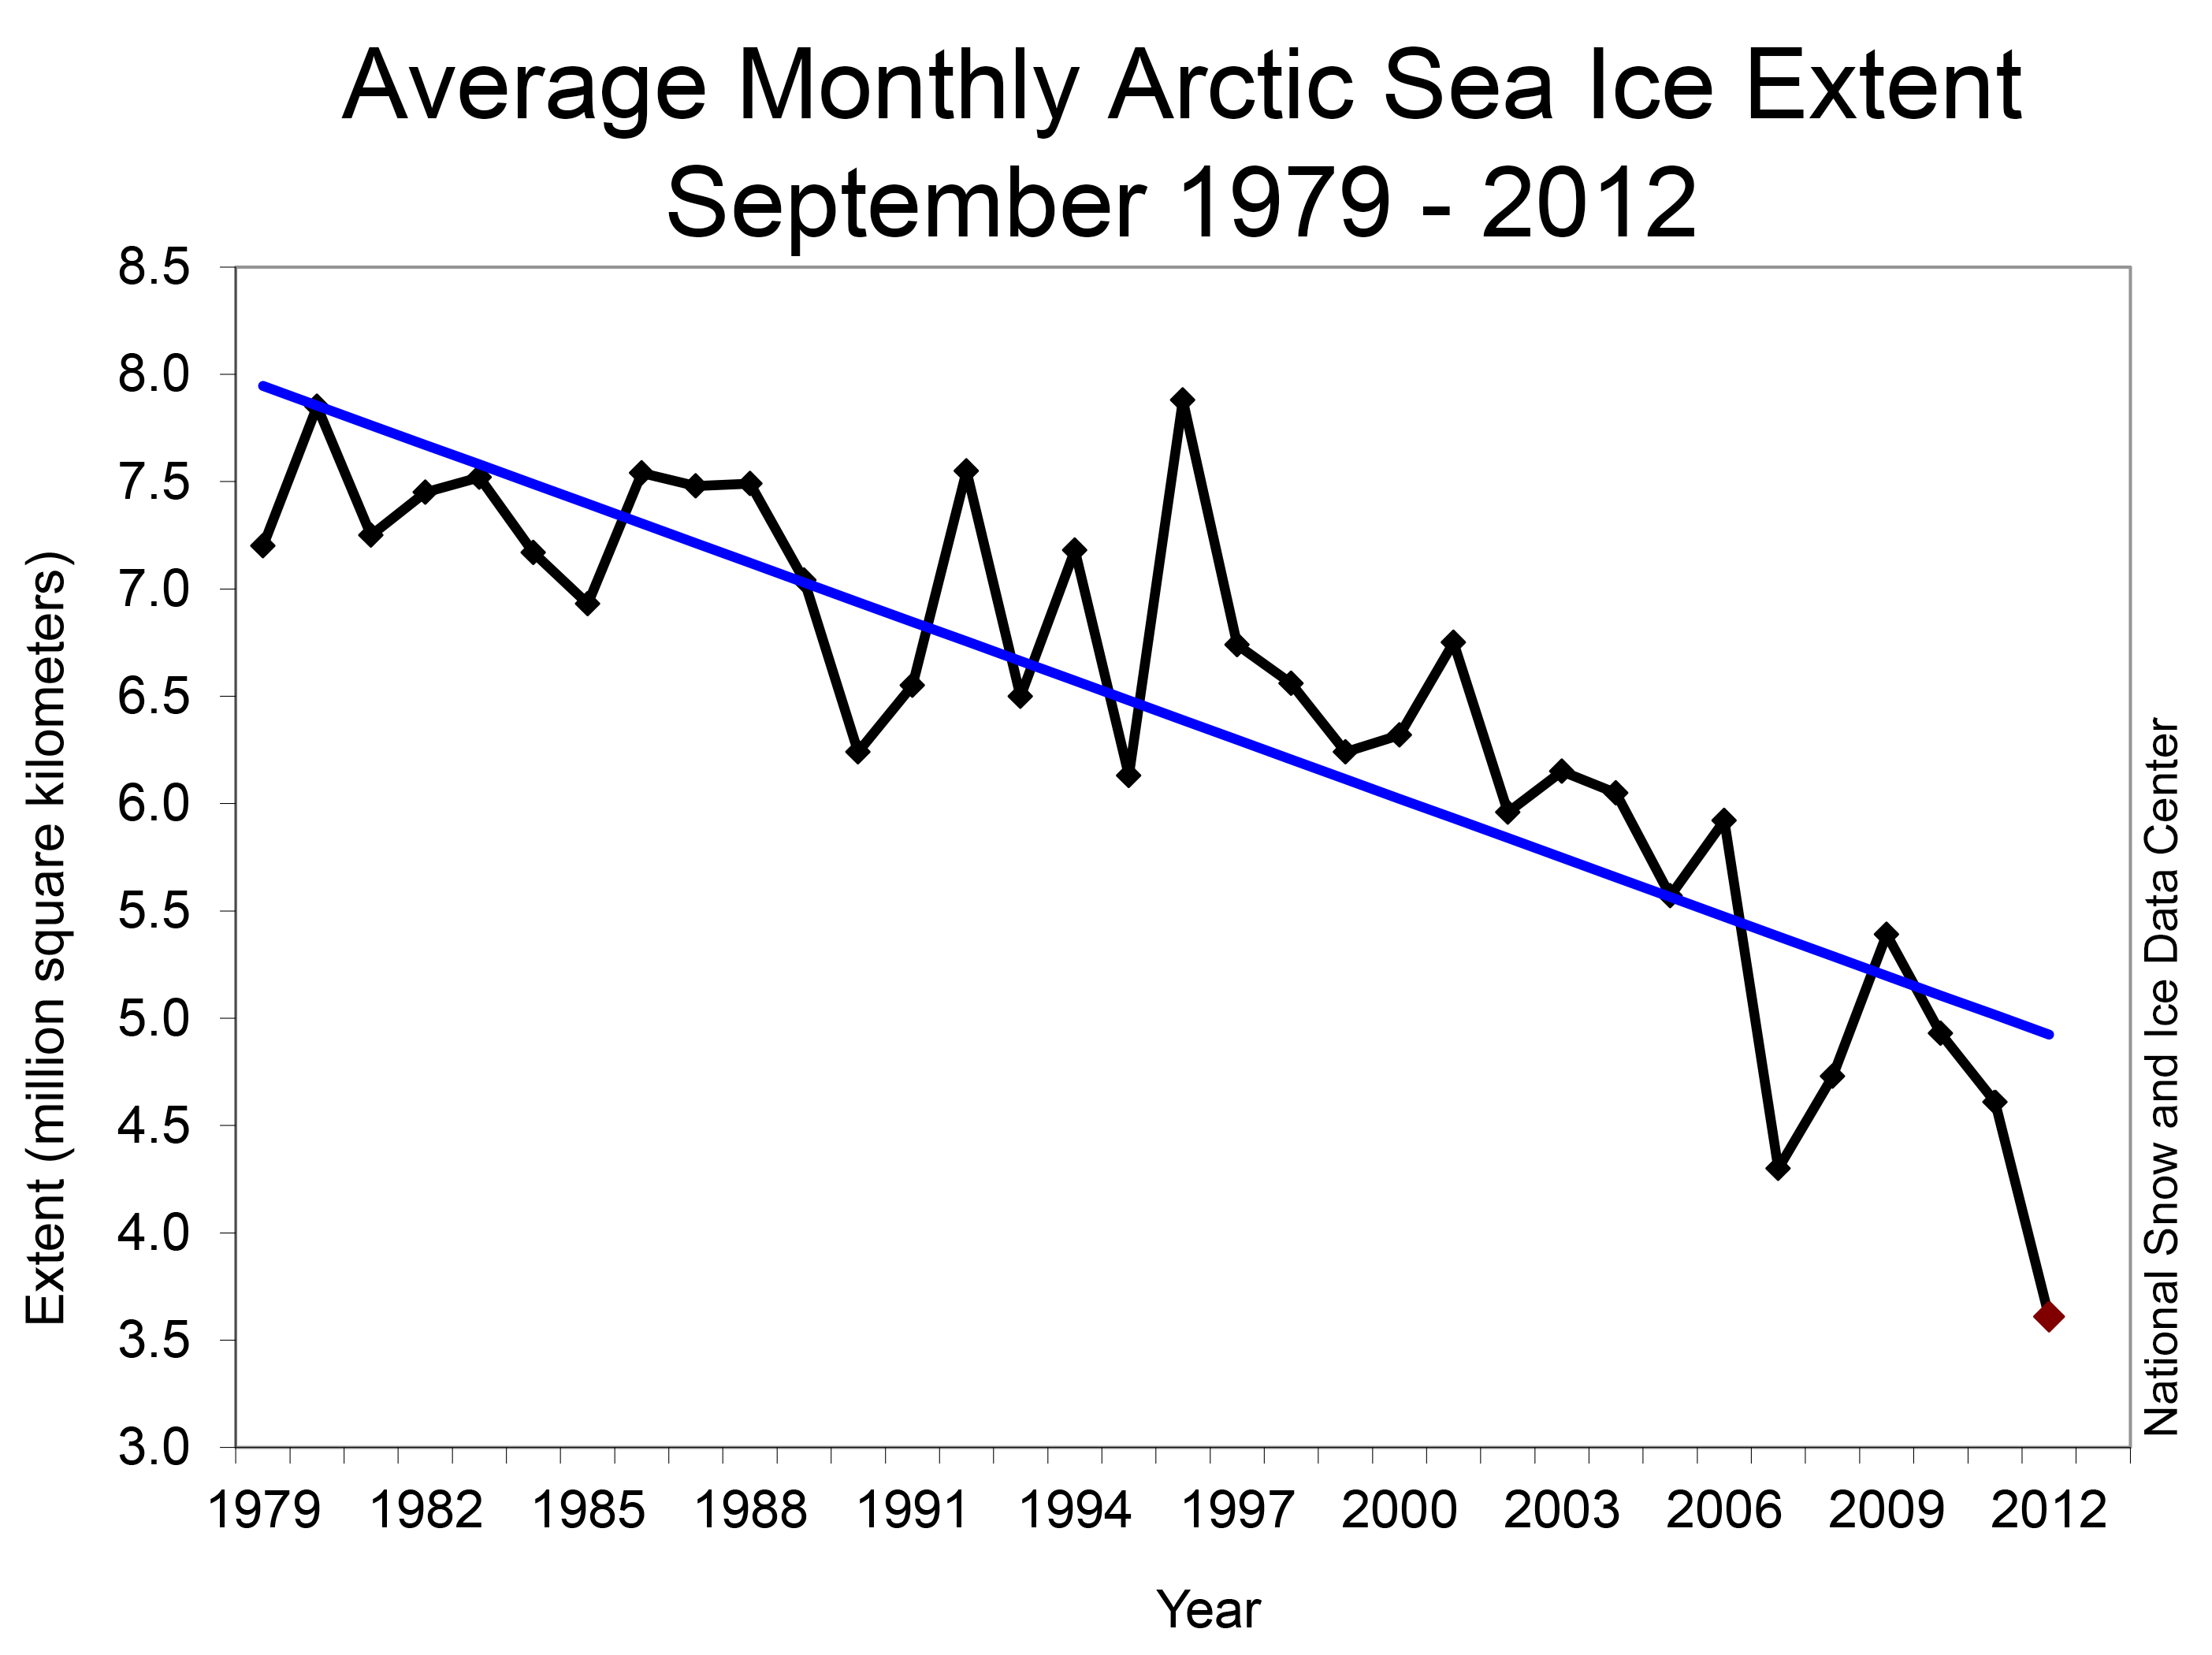 It’s no coincidence that the loss of sea ice (B) is directly correlated with a drop in Northern shrimp (A) (Pandalus borealis). Cod can migrate to other areas of ice with more ease than shrimp so can maintain reasonable numbers for the time being.